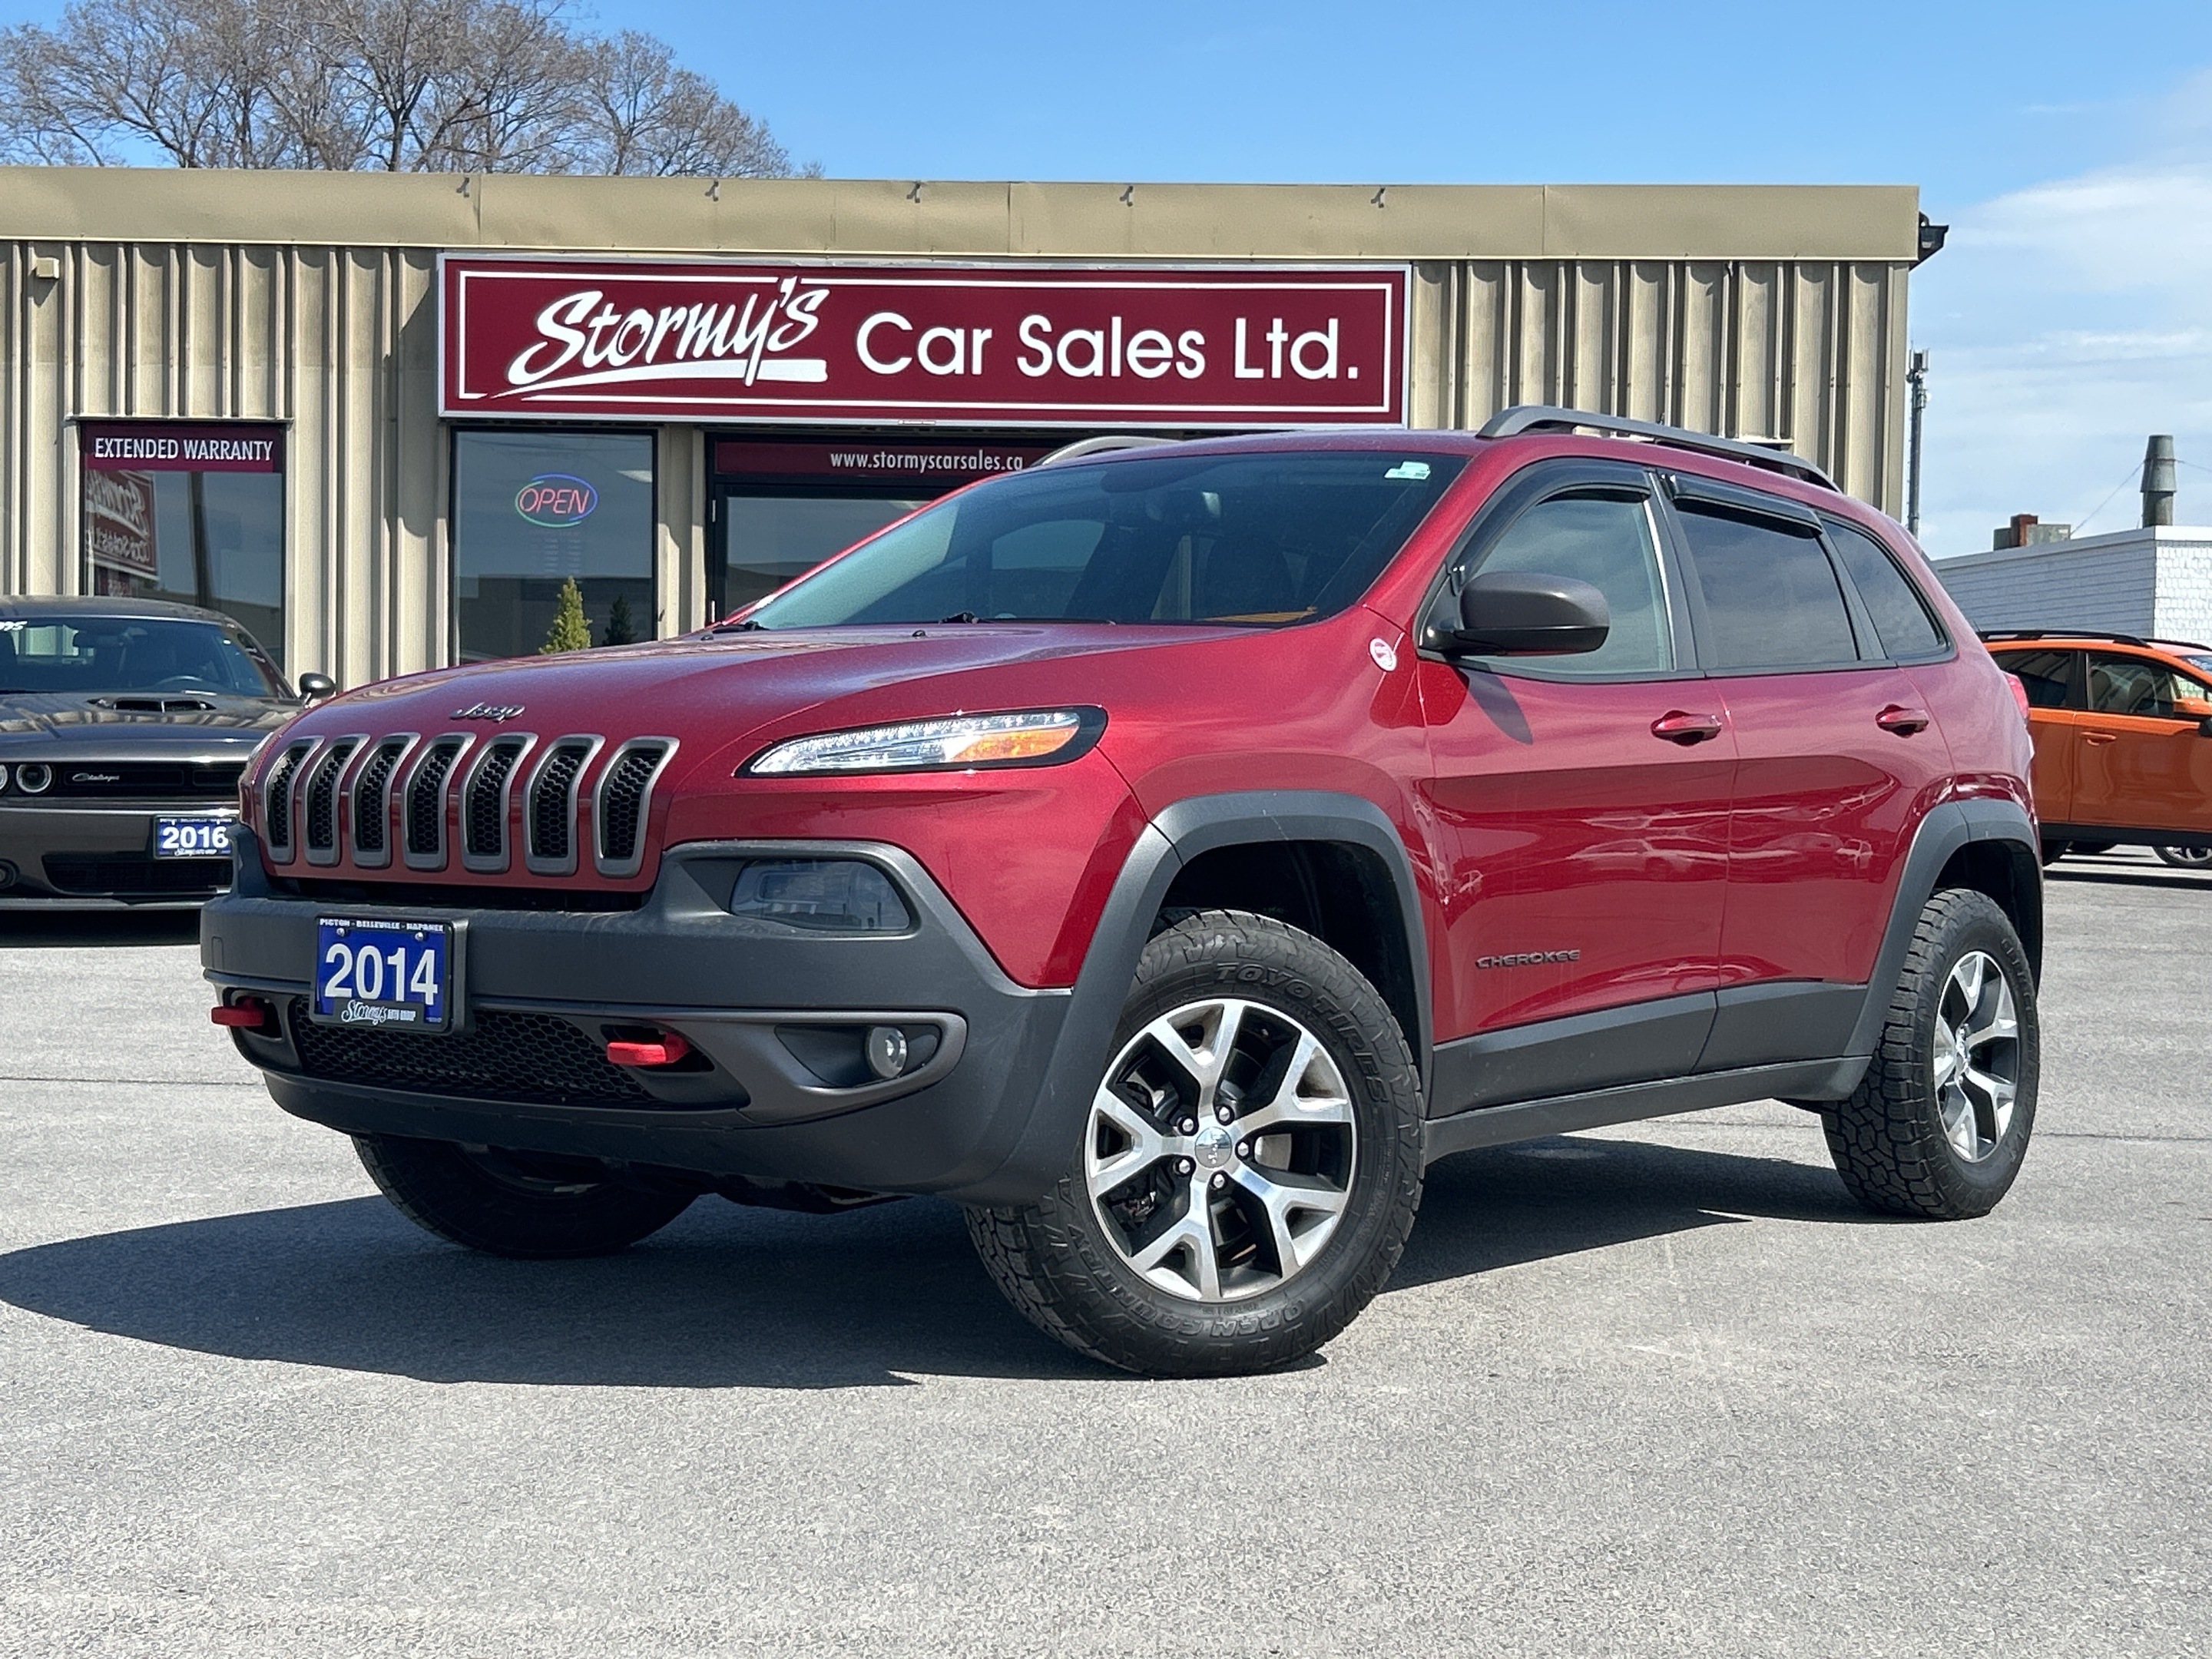 2014 Jeep Cherokee Trailhawk 4X4 LEATHER CALL NAPANEE 613-354-2100